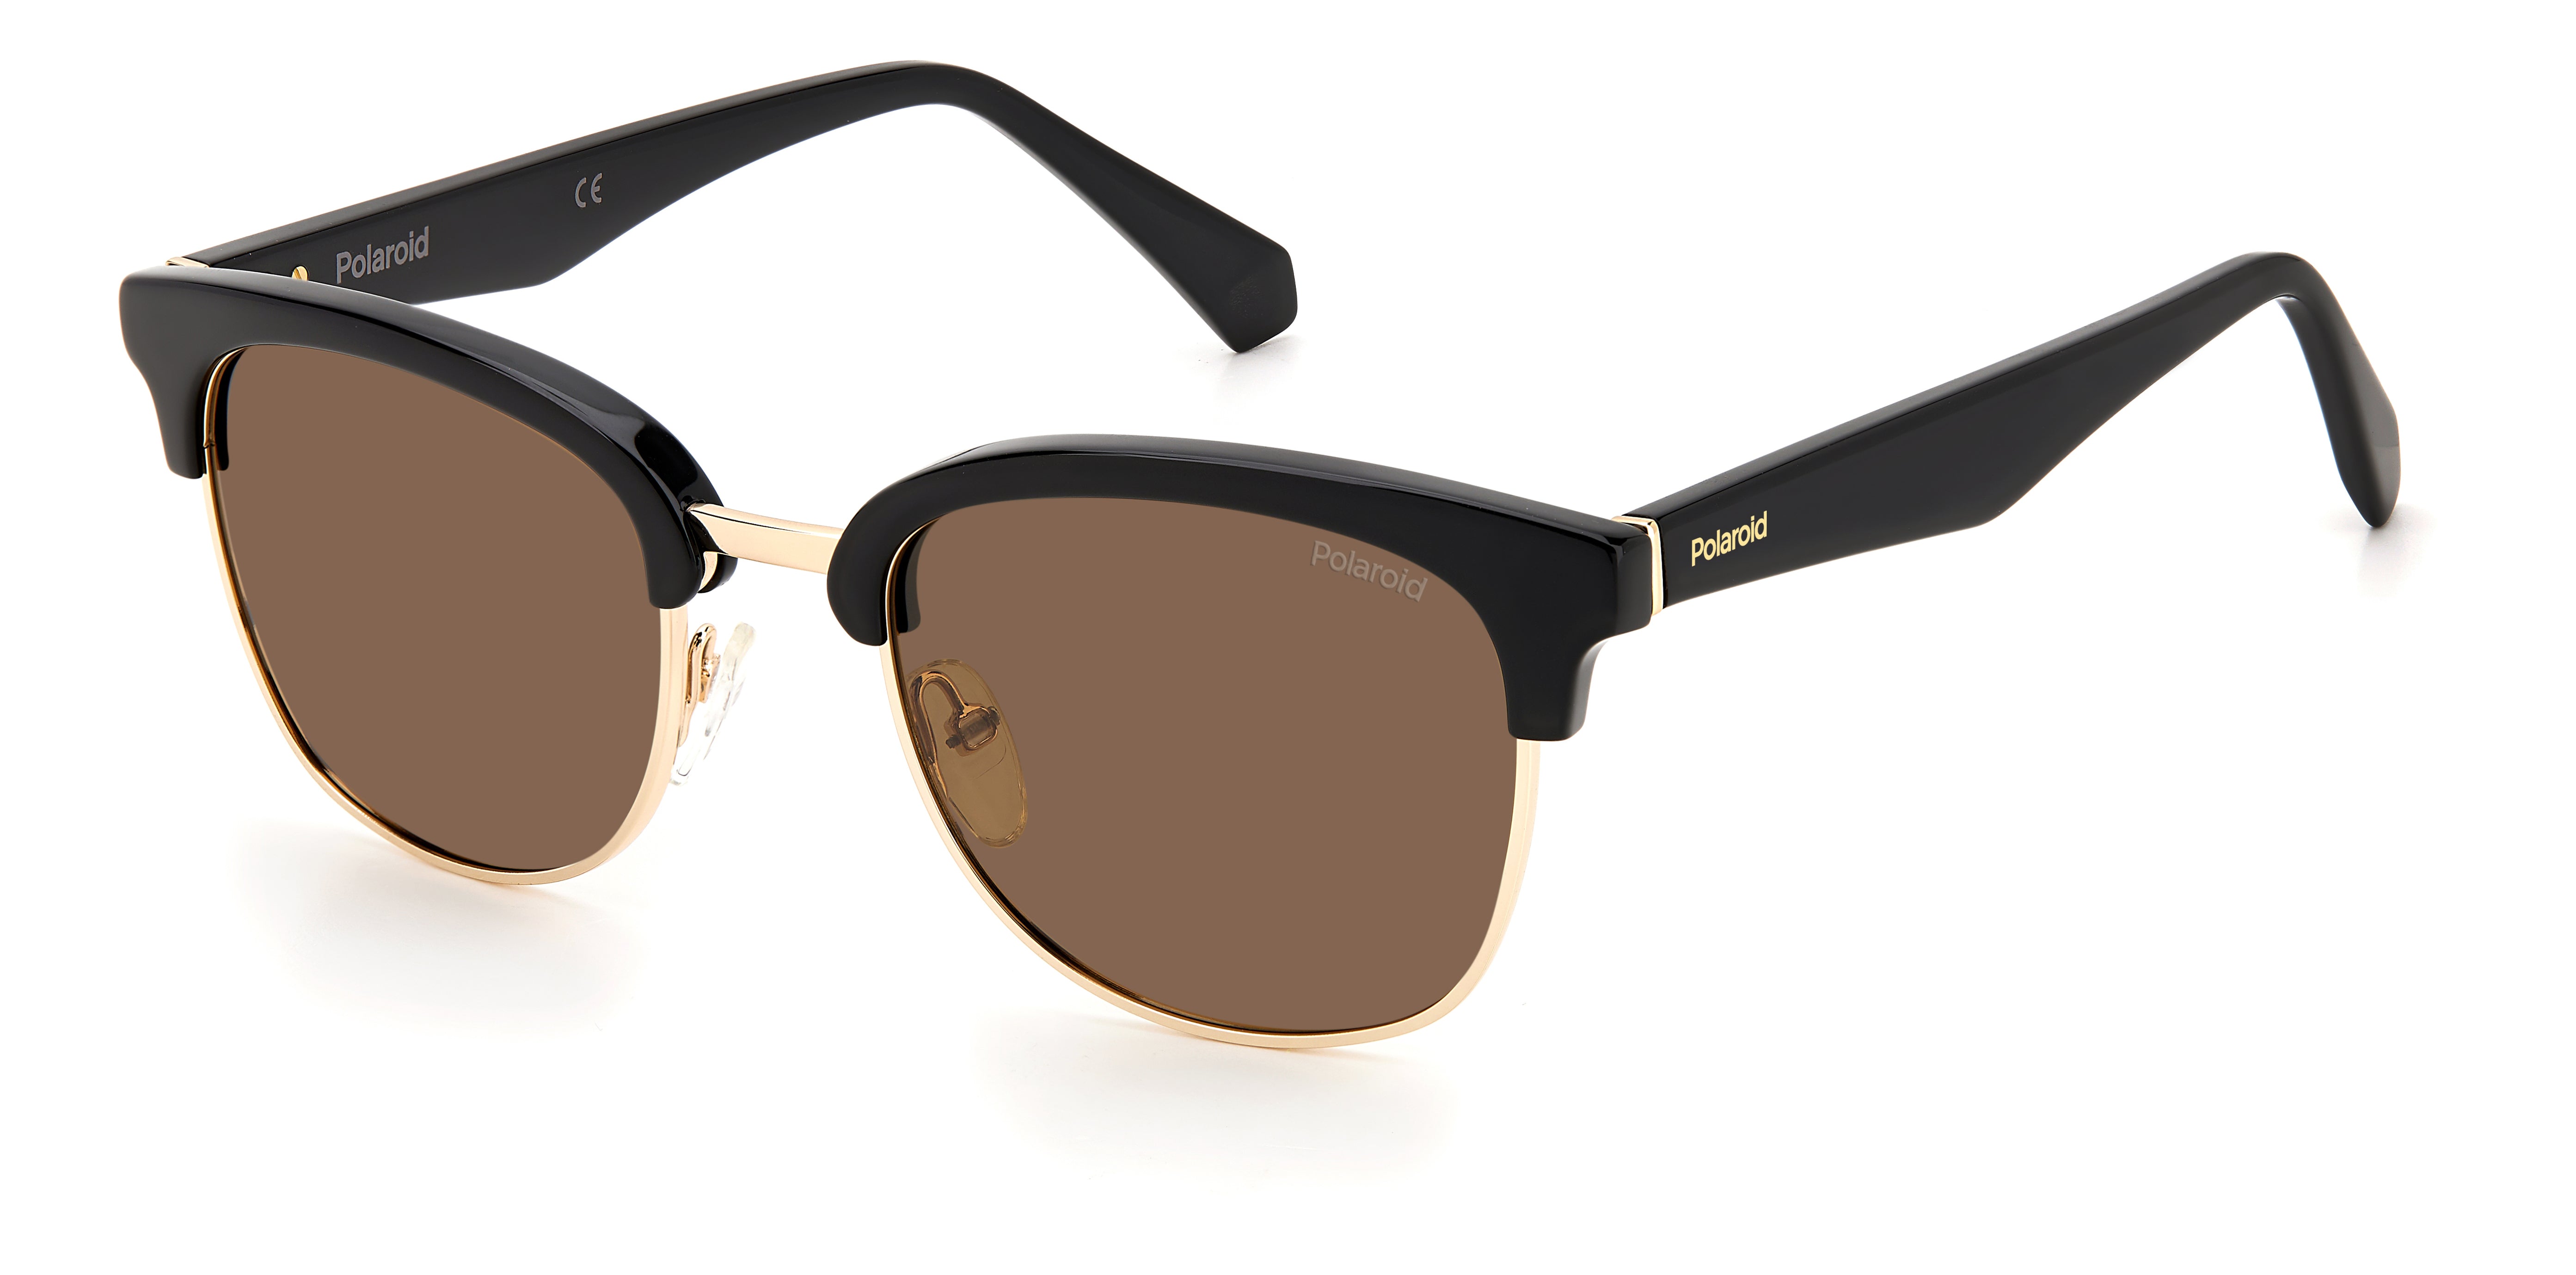 Ray-Ban Clubmaster Rb 3016 men Sunglasses online sale